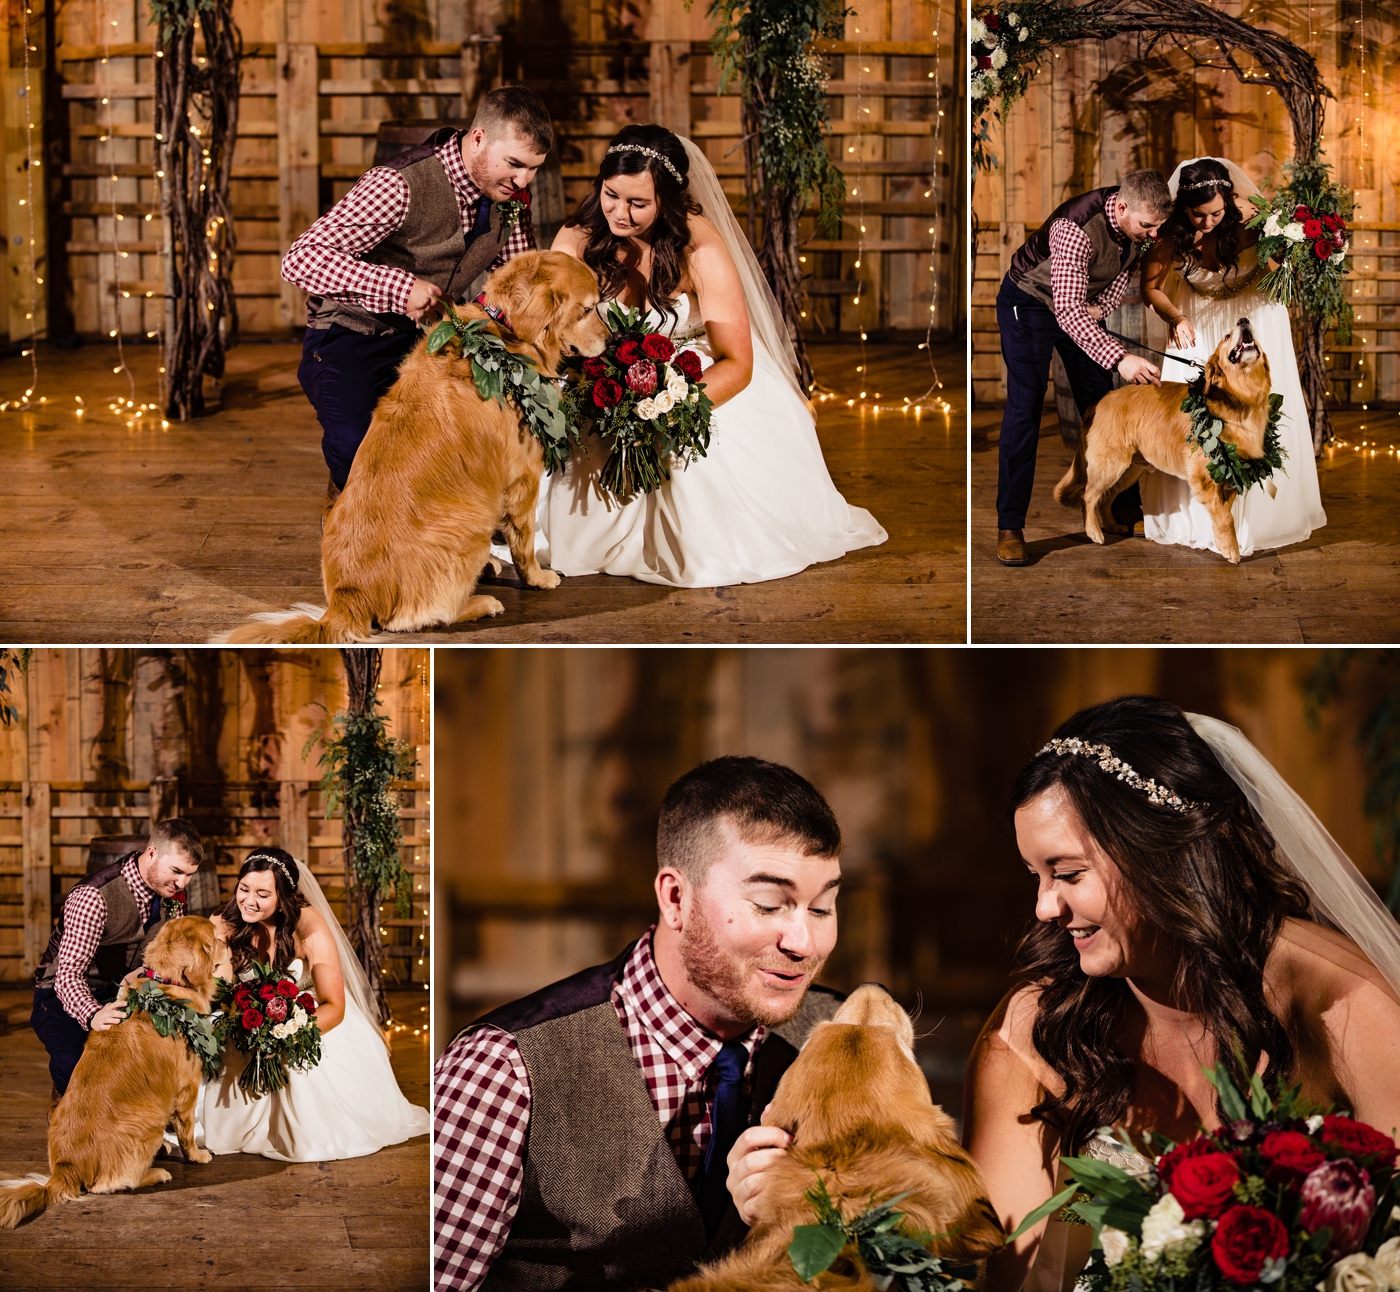 Wedding at Jorgensen Farms - bride and groom with dog